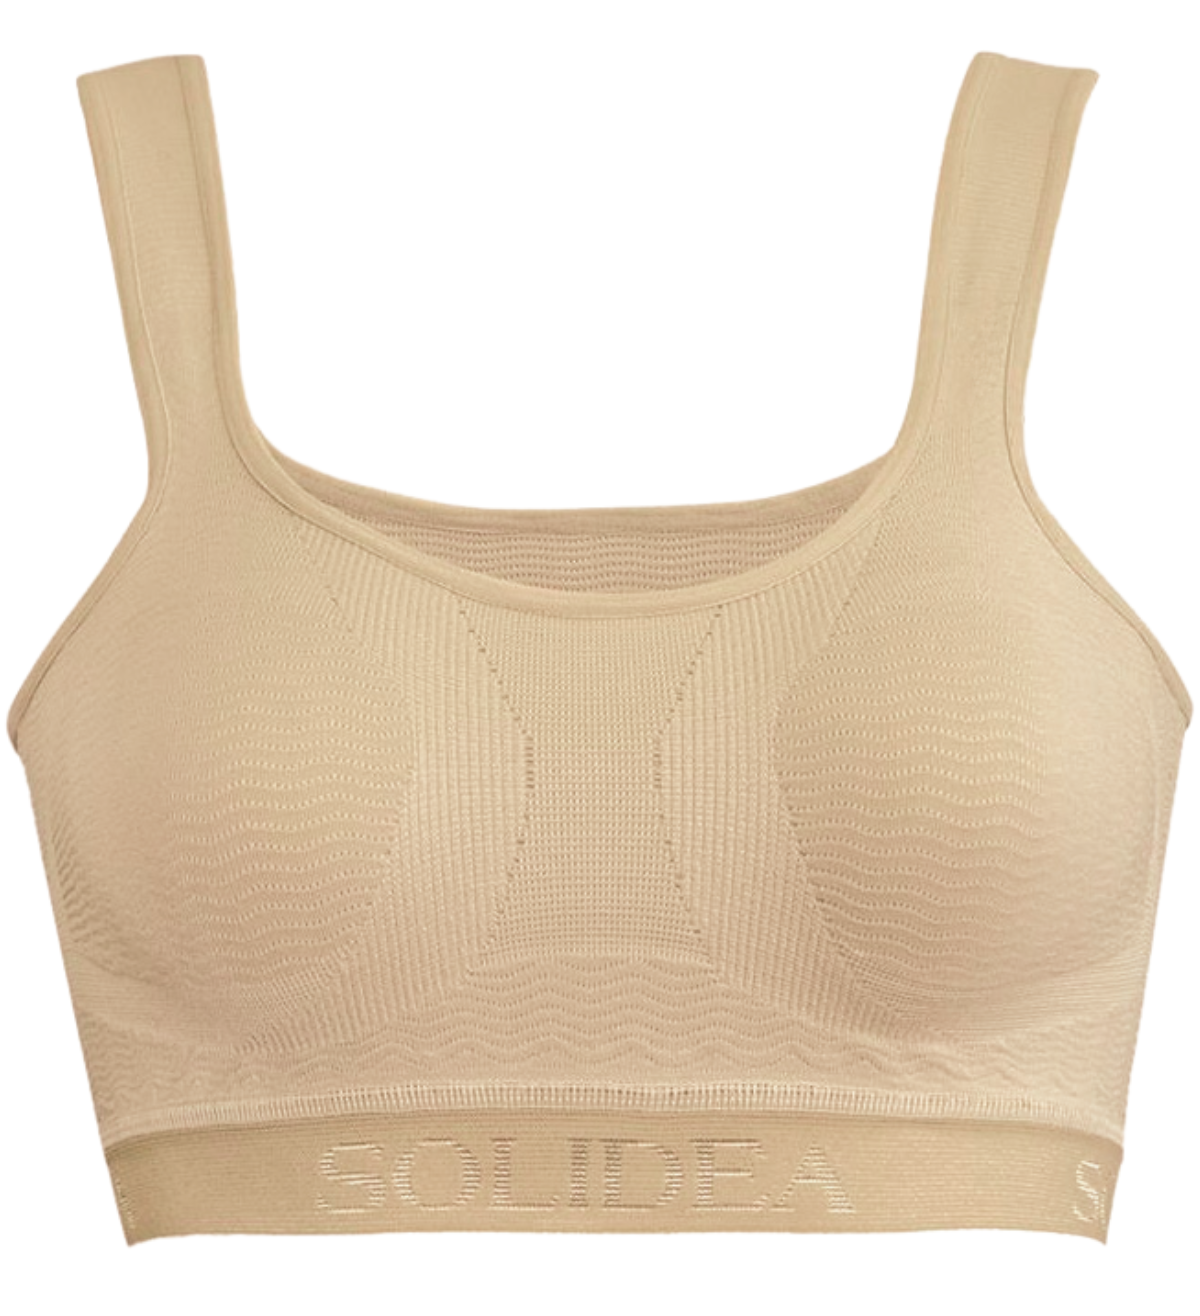 Hello! Flawless Me Breast Separator bra! Product featured